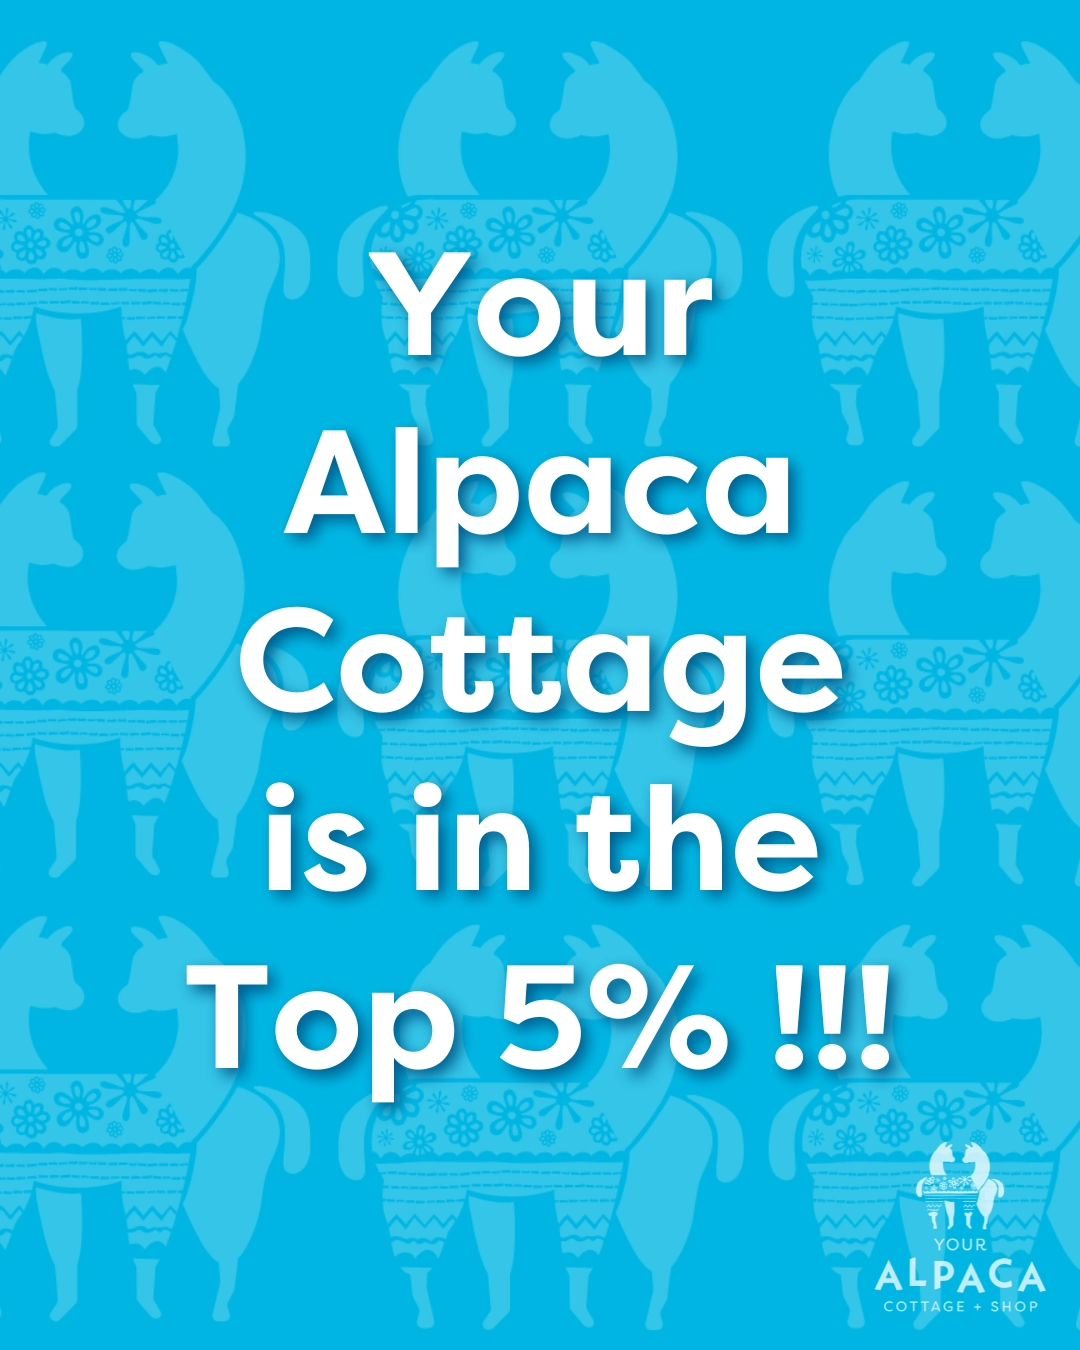 INPUT REQUESTED 😊 In addition to being a Superhost for 7+ years, Your Alpaca Cottage is also honored to be among the top 5% of Airbnb's! Now for your input 👉🏼 In your experience with Your Alpaca Cottage, whether as a guest , customer, or as a foll